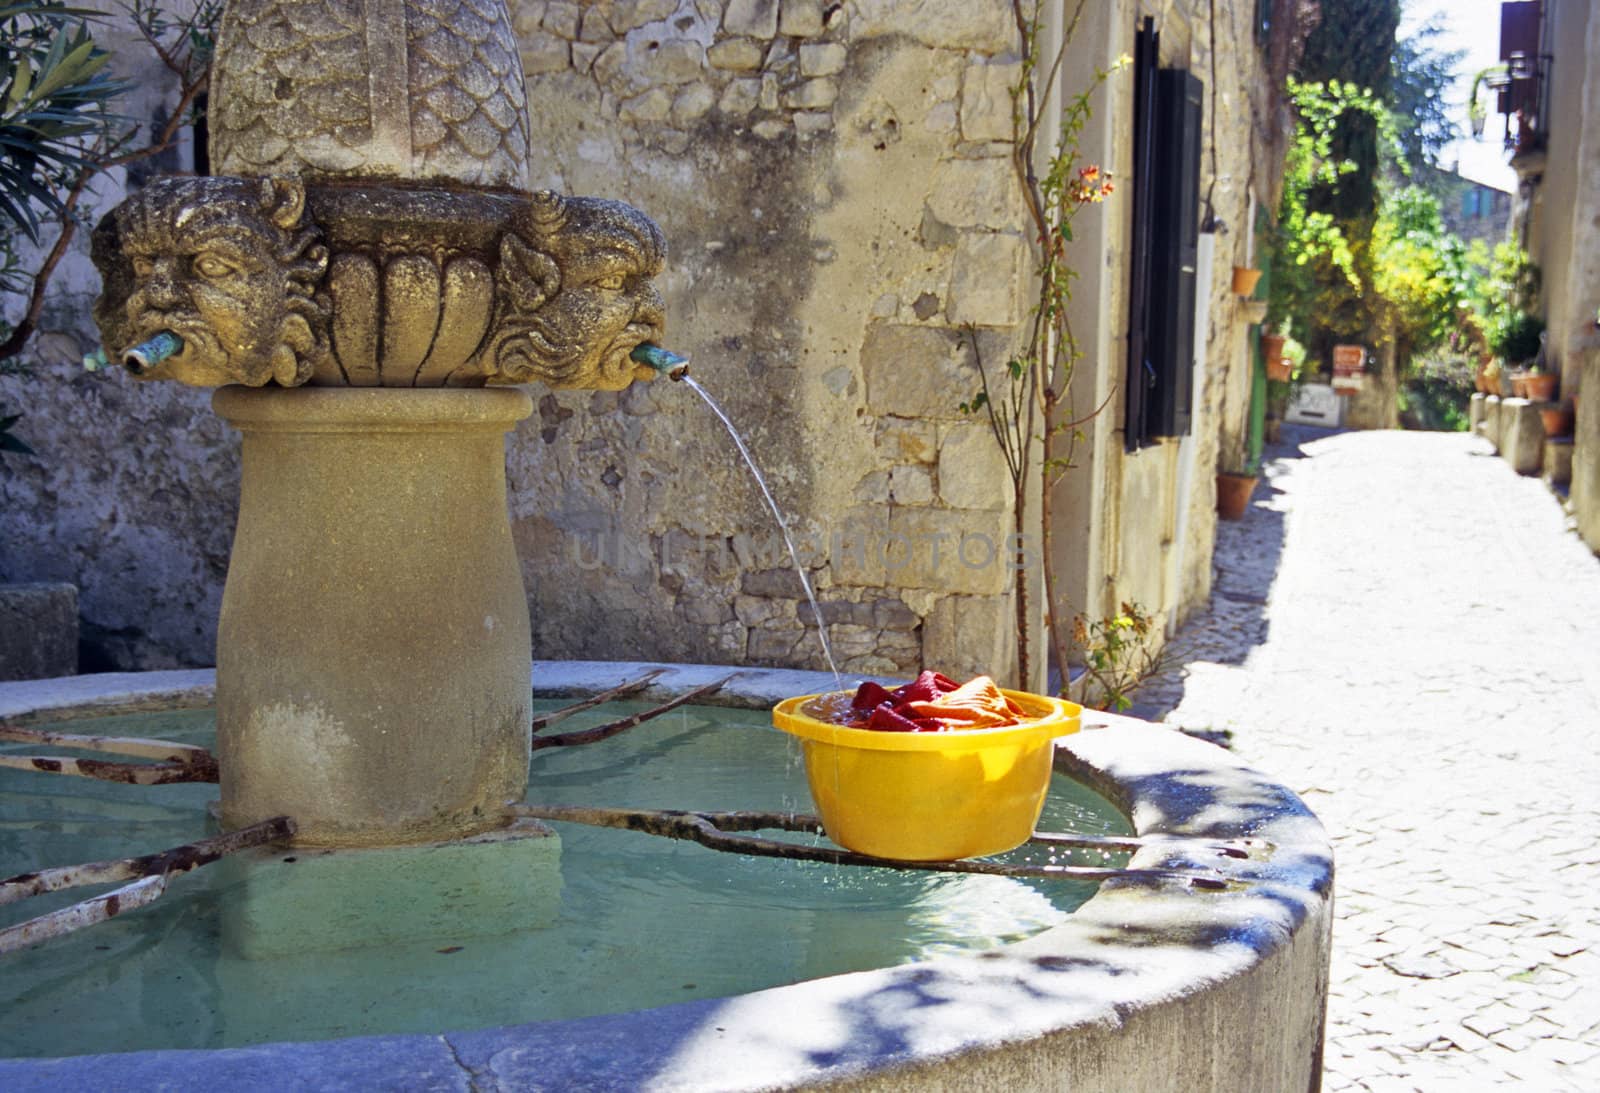 Laundry being washed in a fountain in a rural village in Provence.